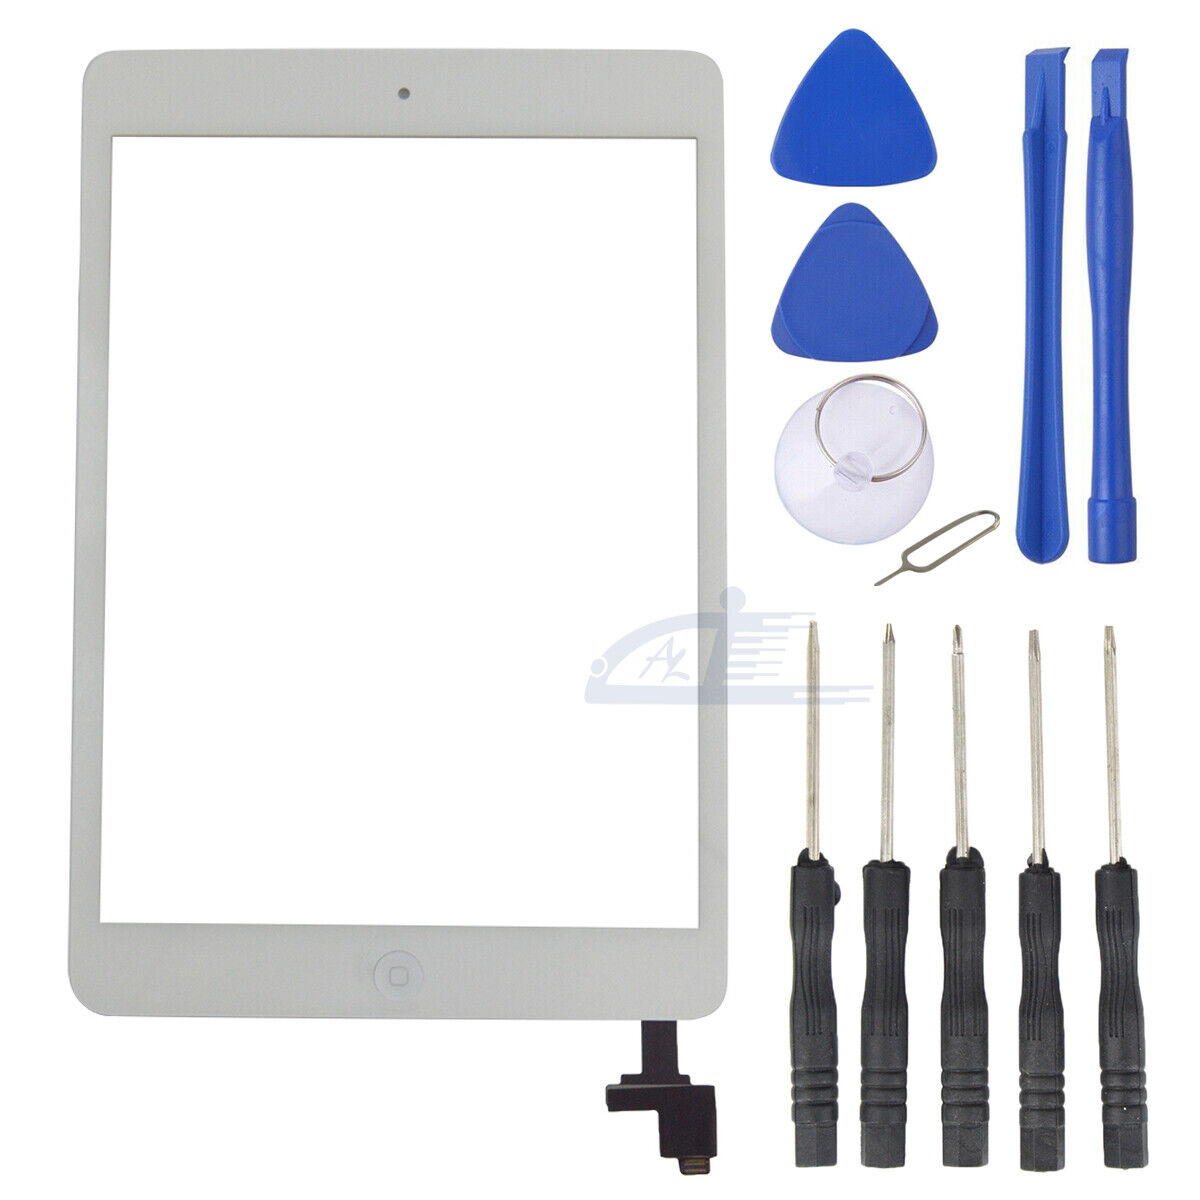 White Touch Screen Glass Digitizer & Tools for iPad Mini 1 2 A1432 A1454 A1455